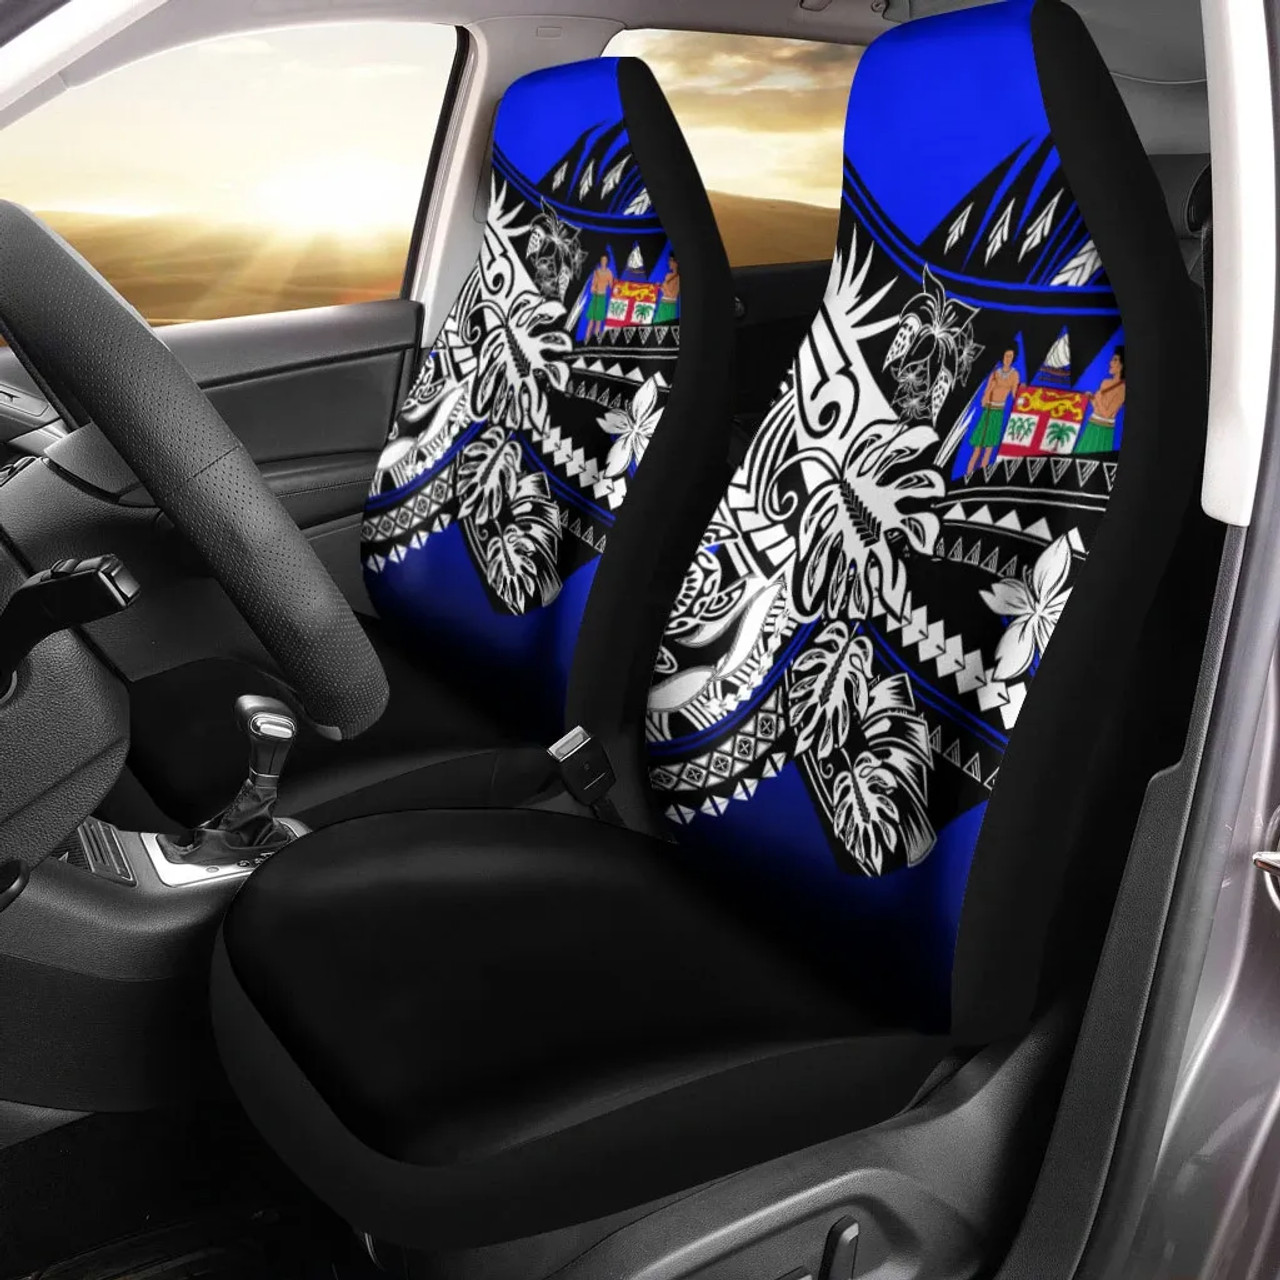 Fiji Car Seat Cover - The Flow OF Ocean Blue Color